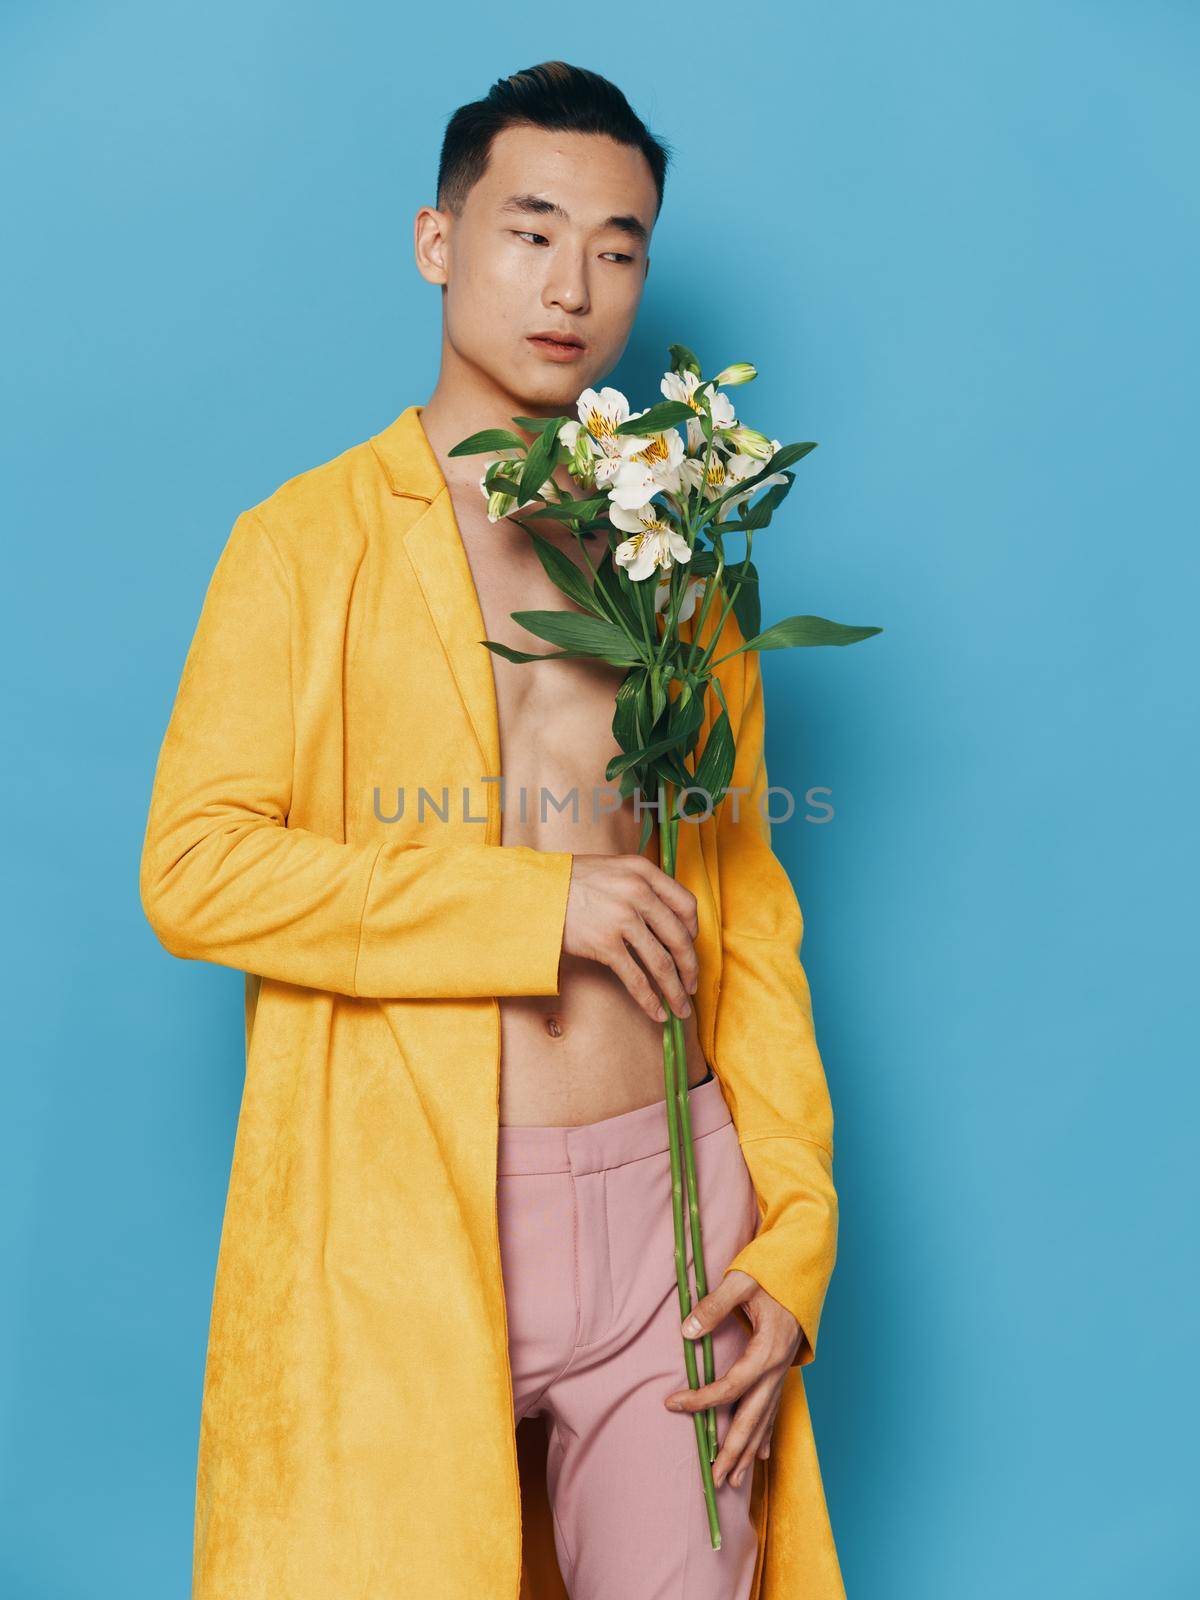 male korean appearance with a bouquet of flowers in a yellow coat and pink trousers. High quality photo